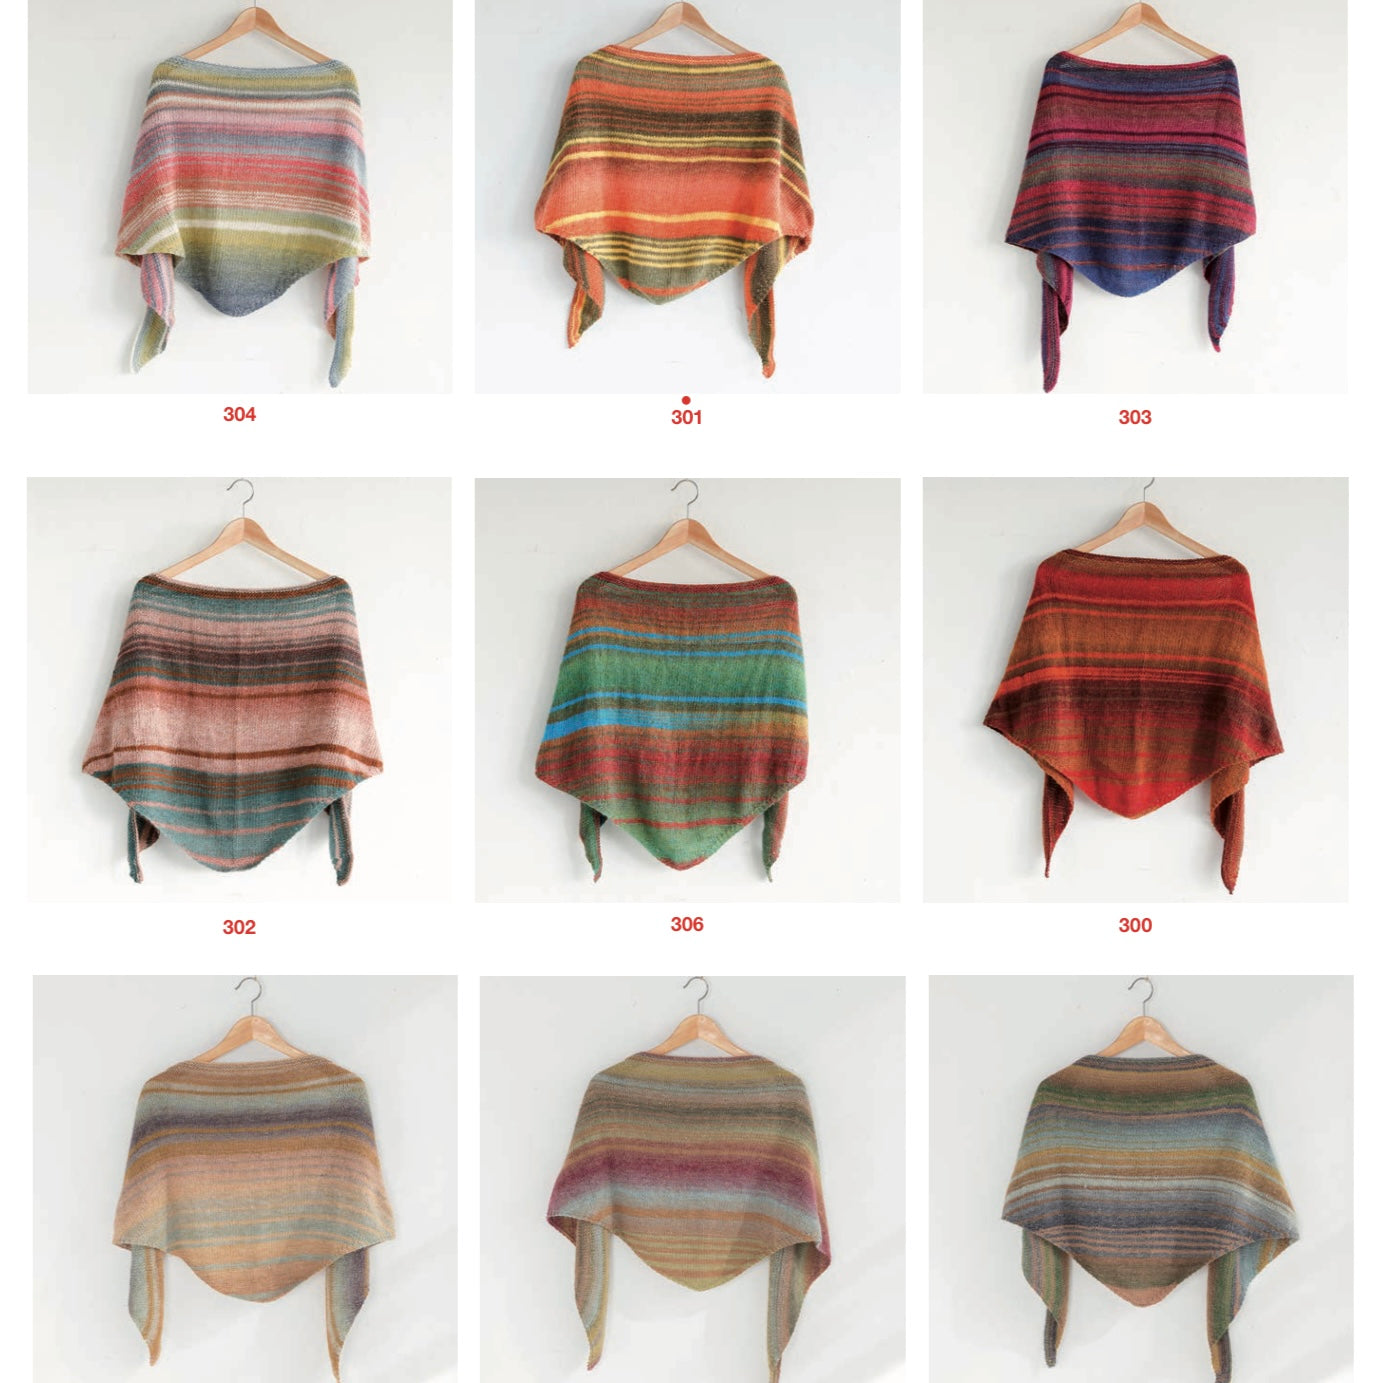 knit shawls in different colors